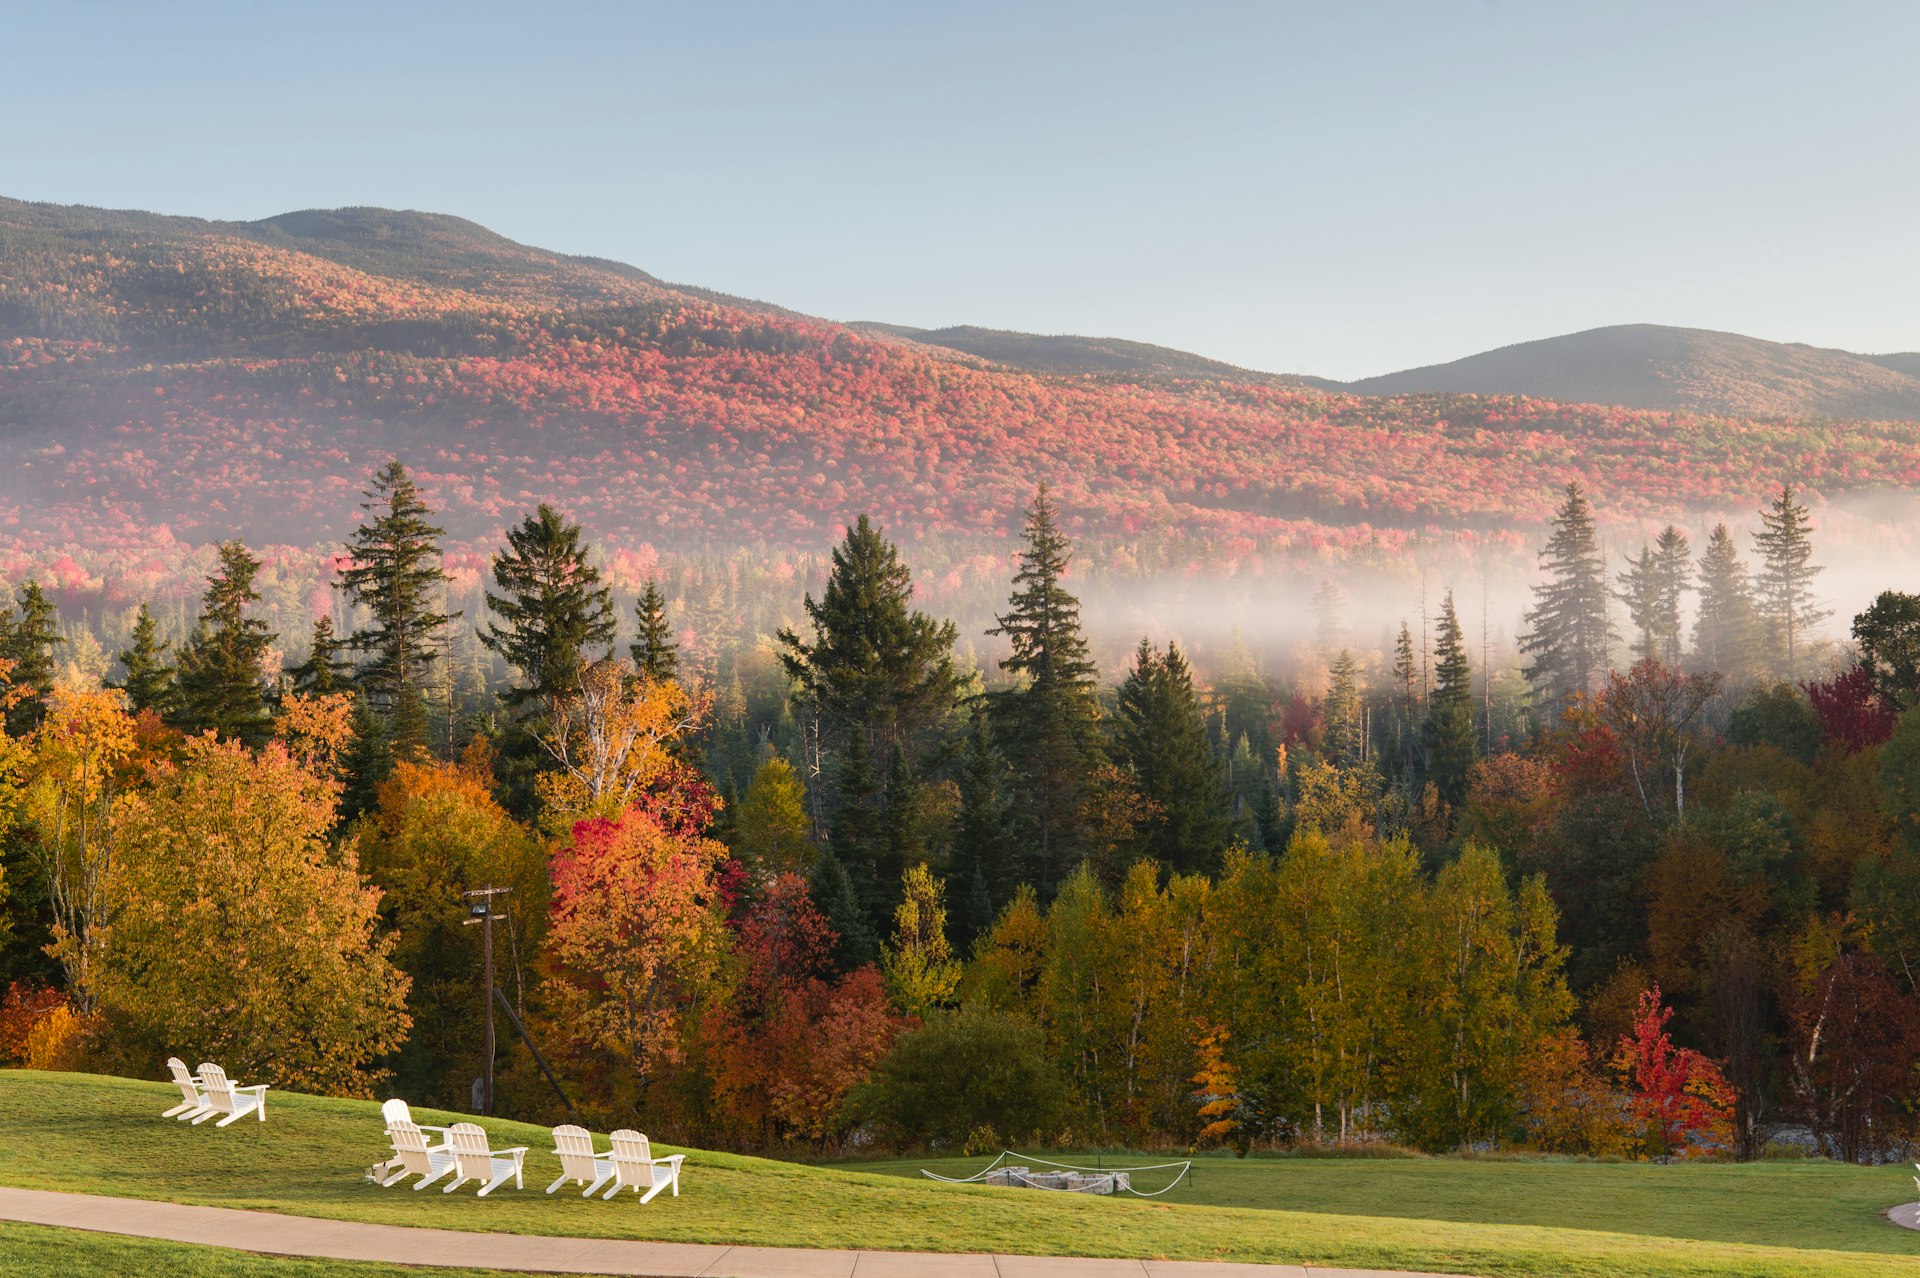 The sweeping view of the White Mountains from the 2nd floor of the Omni Mount Washington Resort in Bretton Woods, New Hampshire